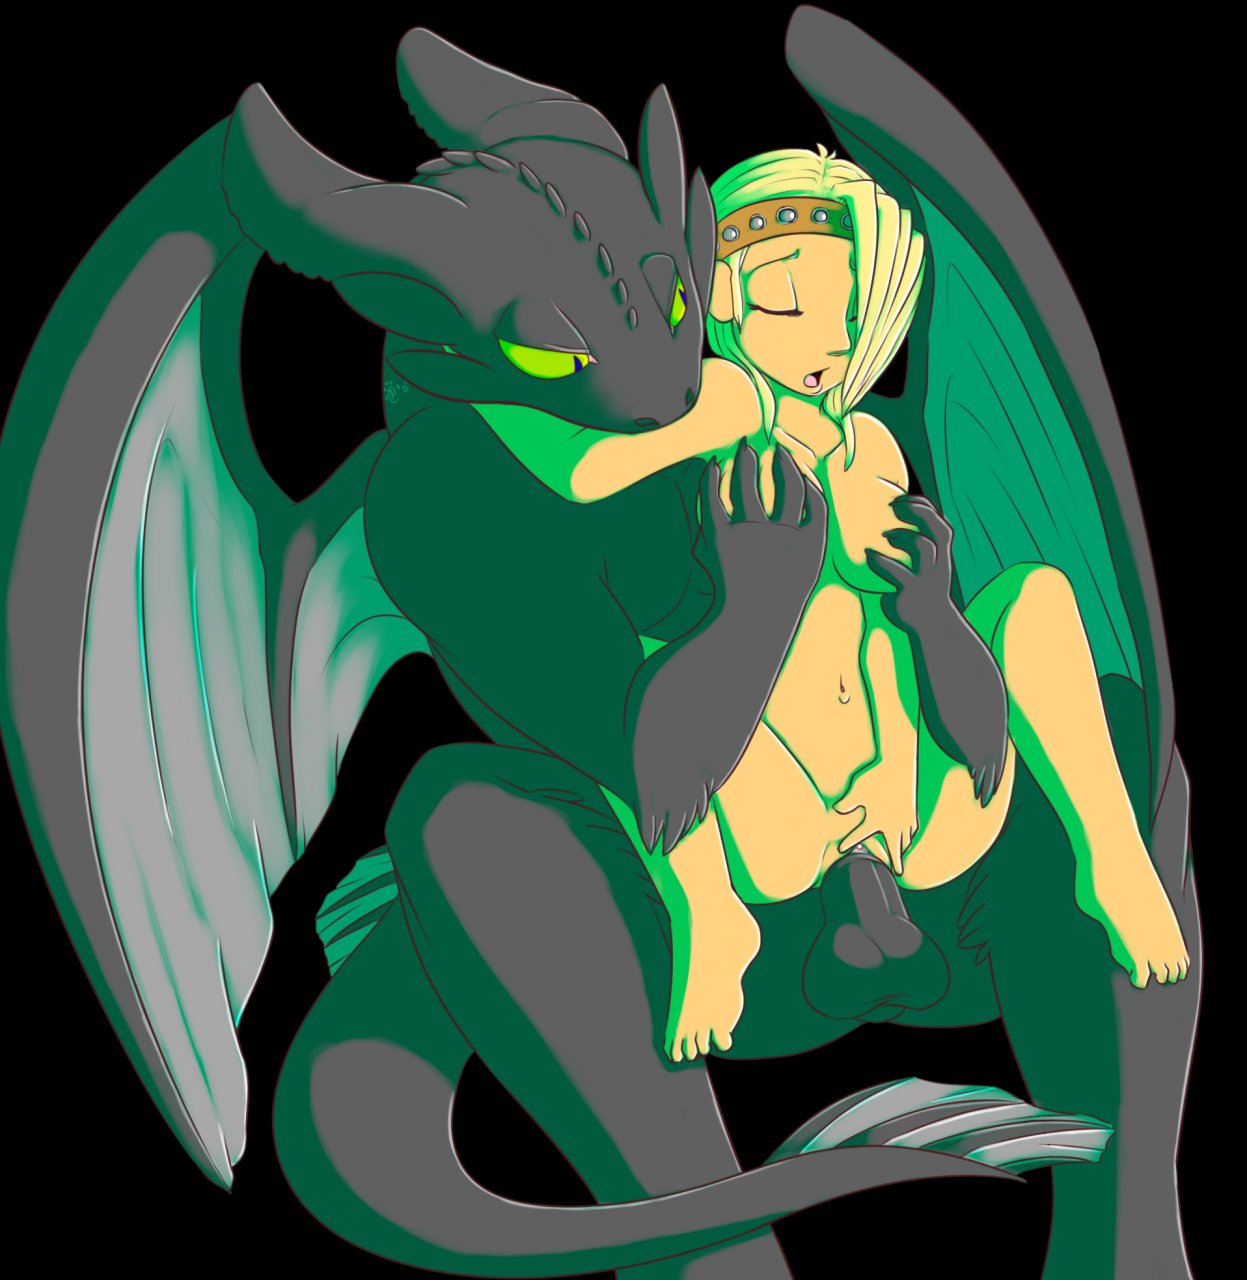 dragon astrid train pregnant your how to Lovely?cation the animation